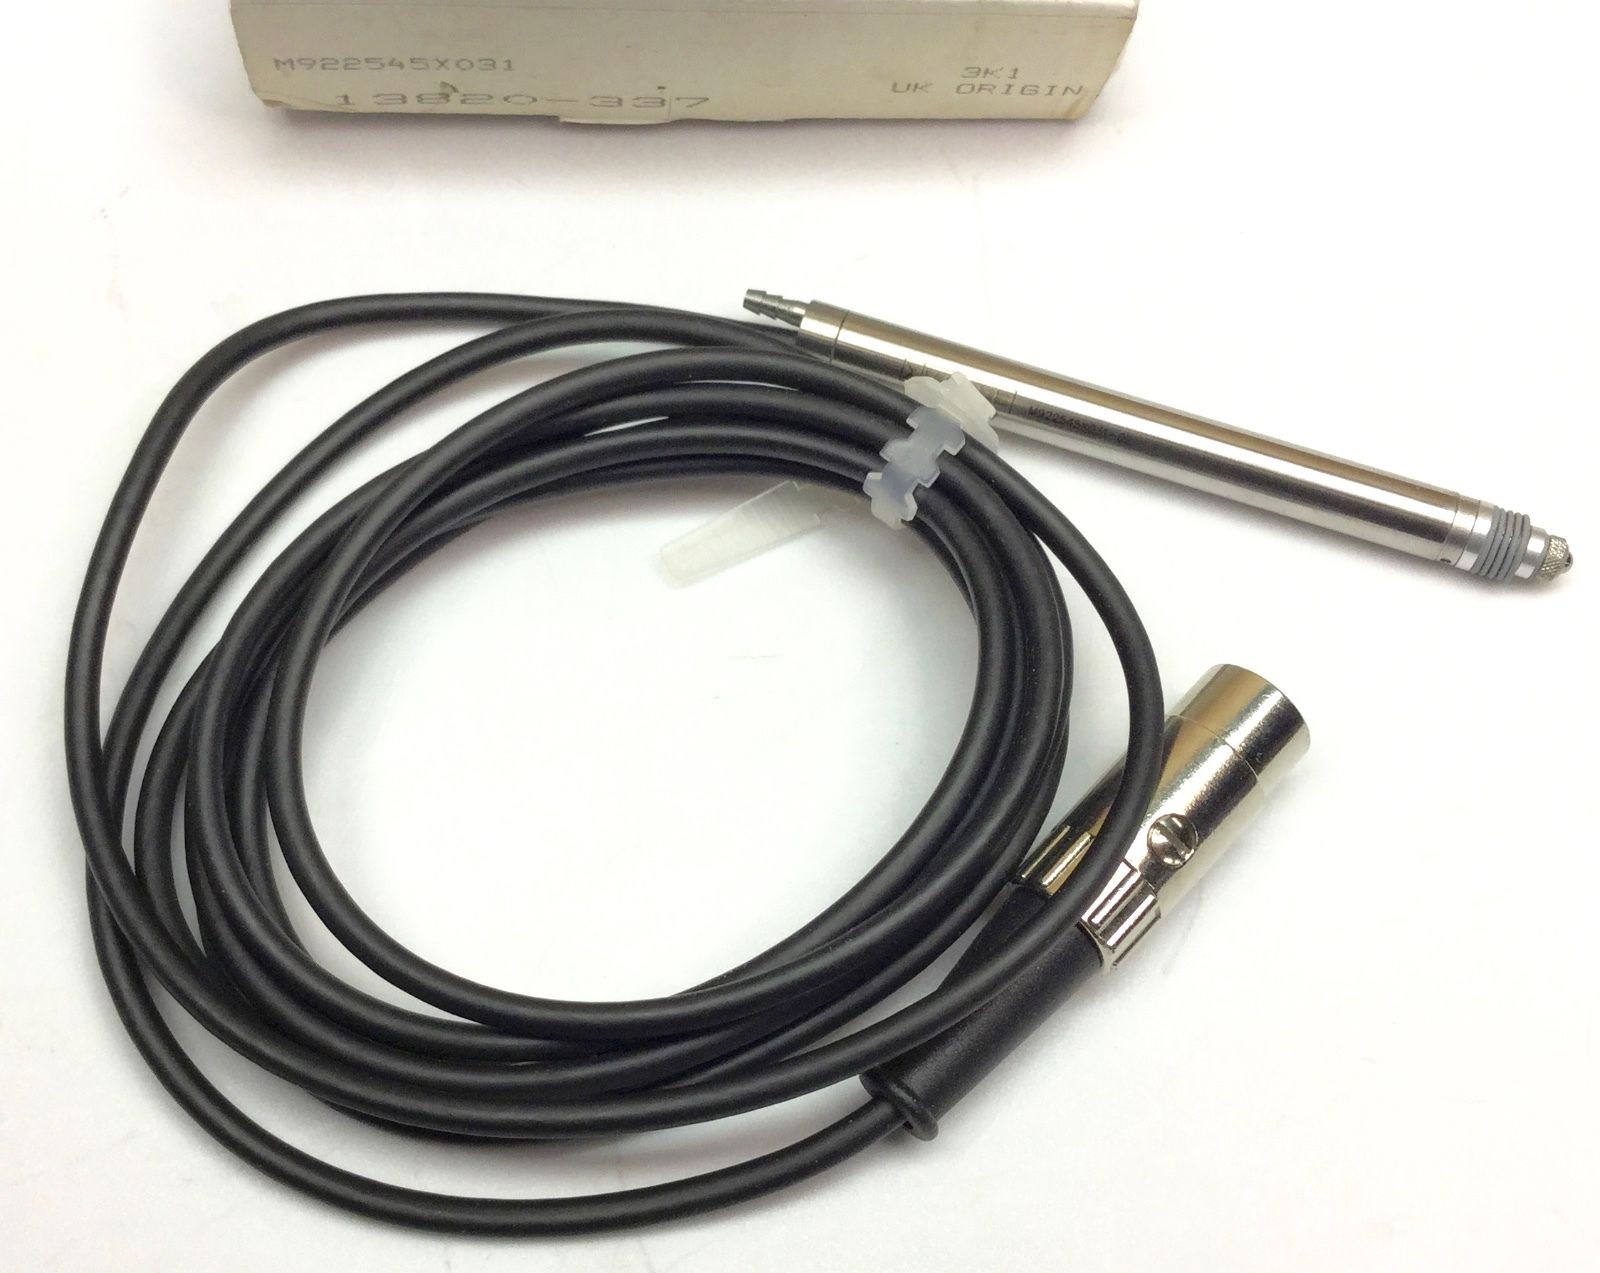 SIEMENS MOORE 13820-337 LINEAR TRANSDUCER PROBE 5 PIN CONNECTOR NEW IN BOX DIAGNOSTIC ULTRASOUND MACHINES FOR SALE